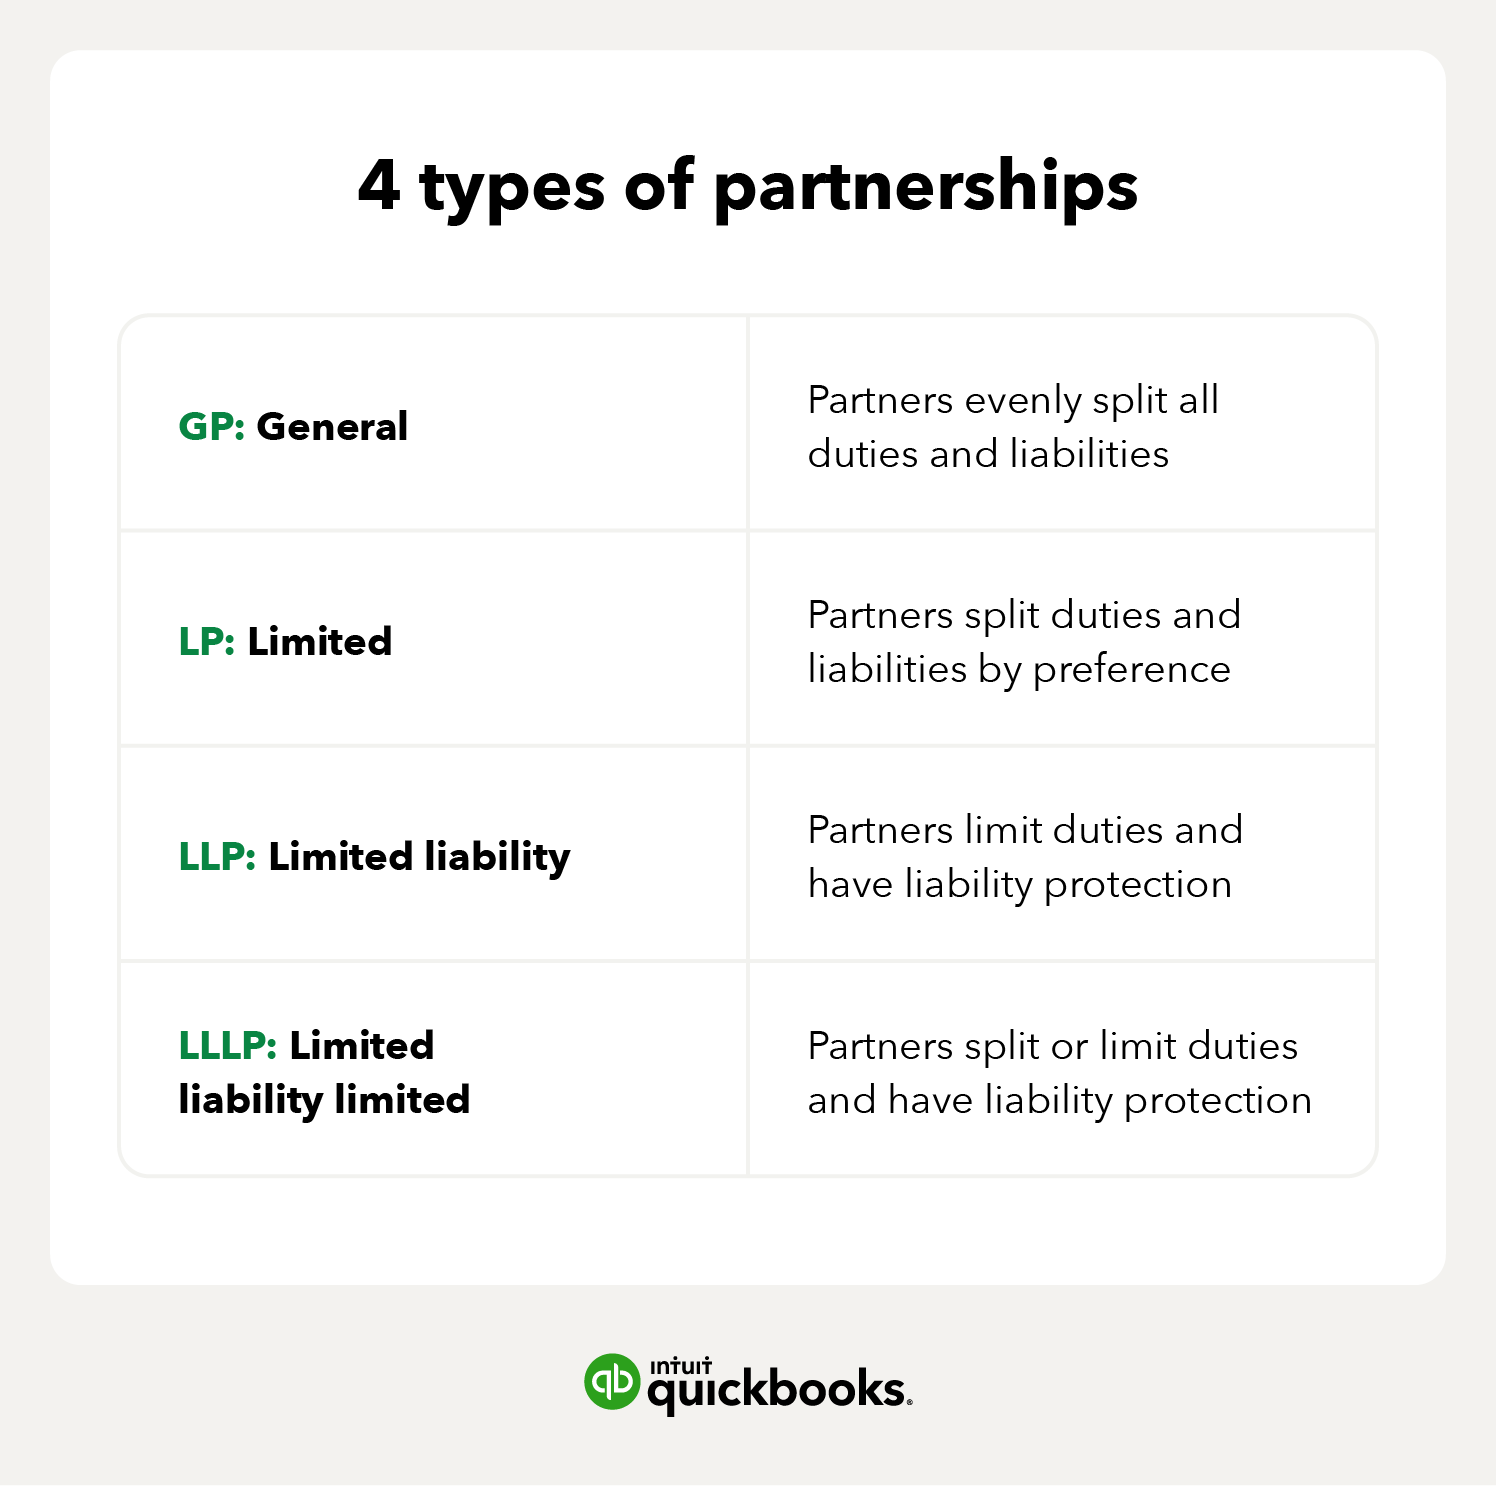 Chart explaining the 4 types of business partnerships: general (GP), limited (LP), limited liability (LLP), and limited liability limited (LLLP).